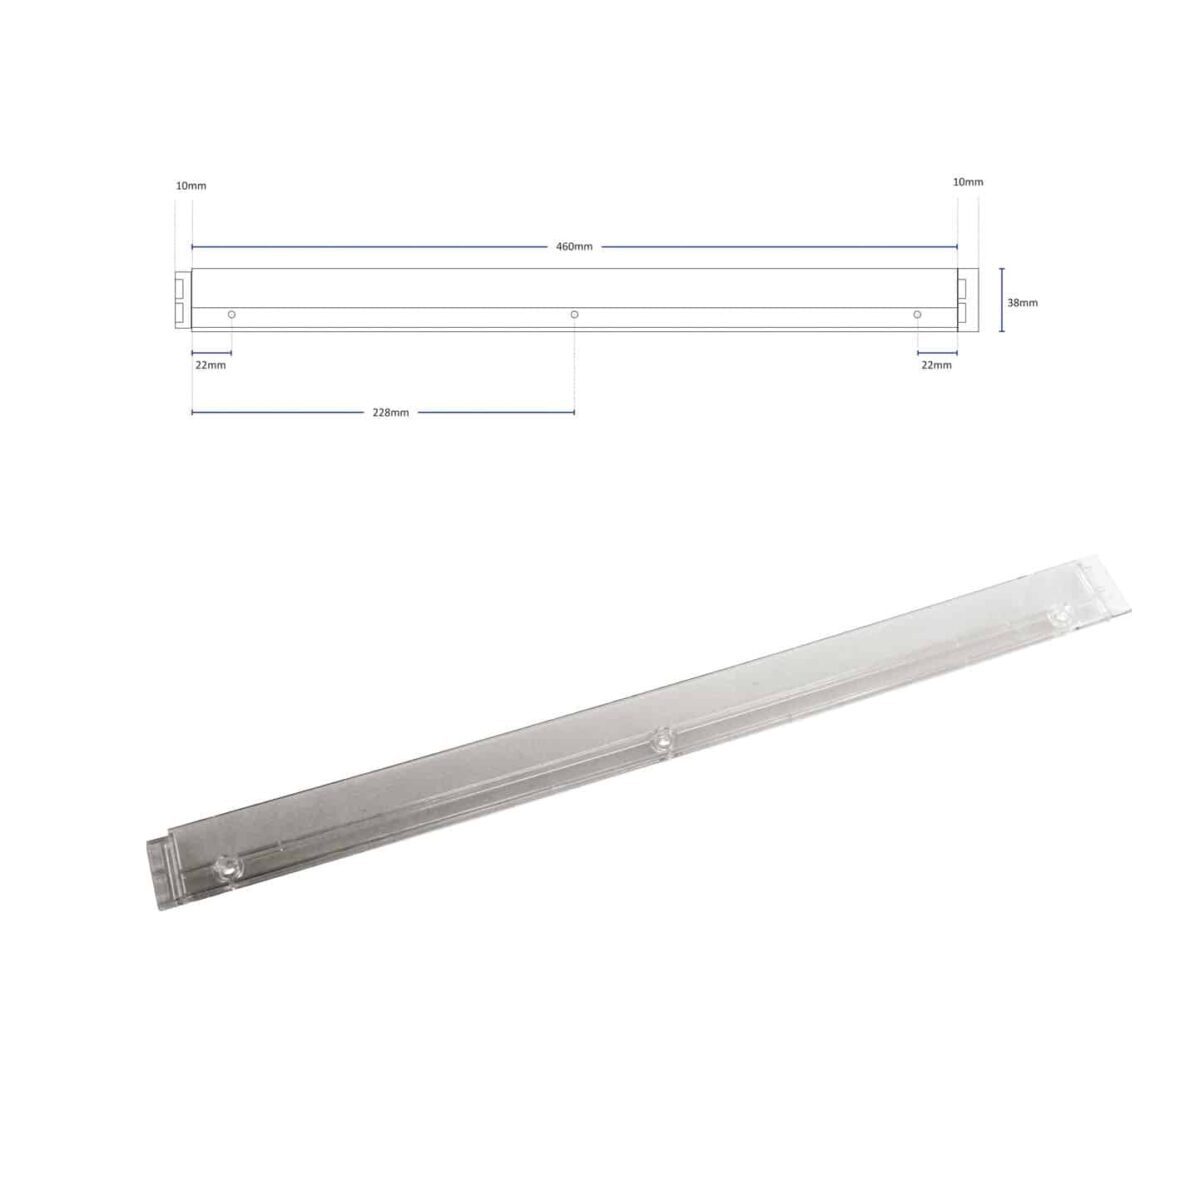 460mm Plastic Wall Strip (Suits 415332 & 415333)